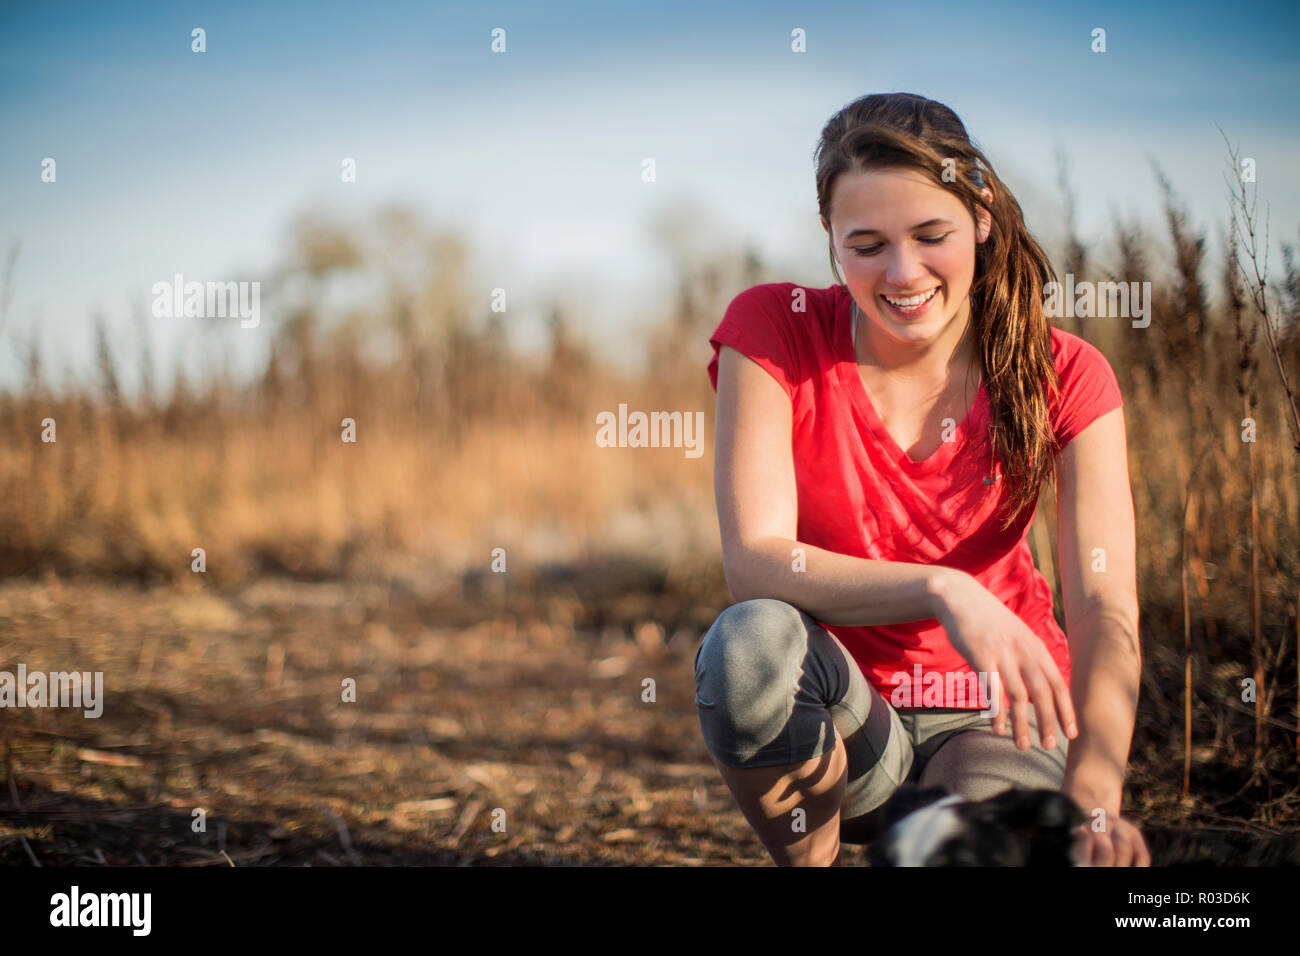 Smiling young woman takes a break from her countryside run in the late afternoon sunlight. Stock Photo